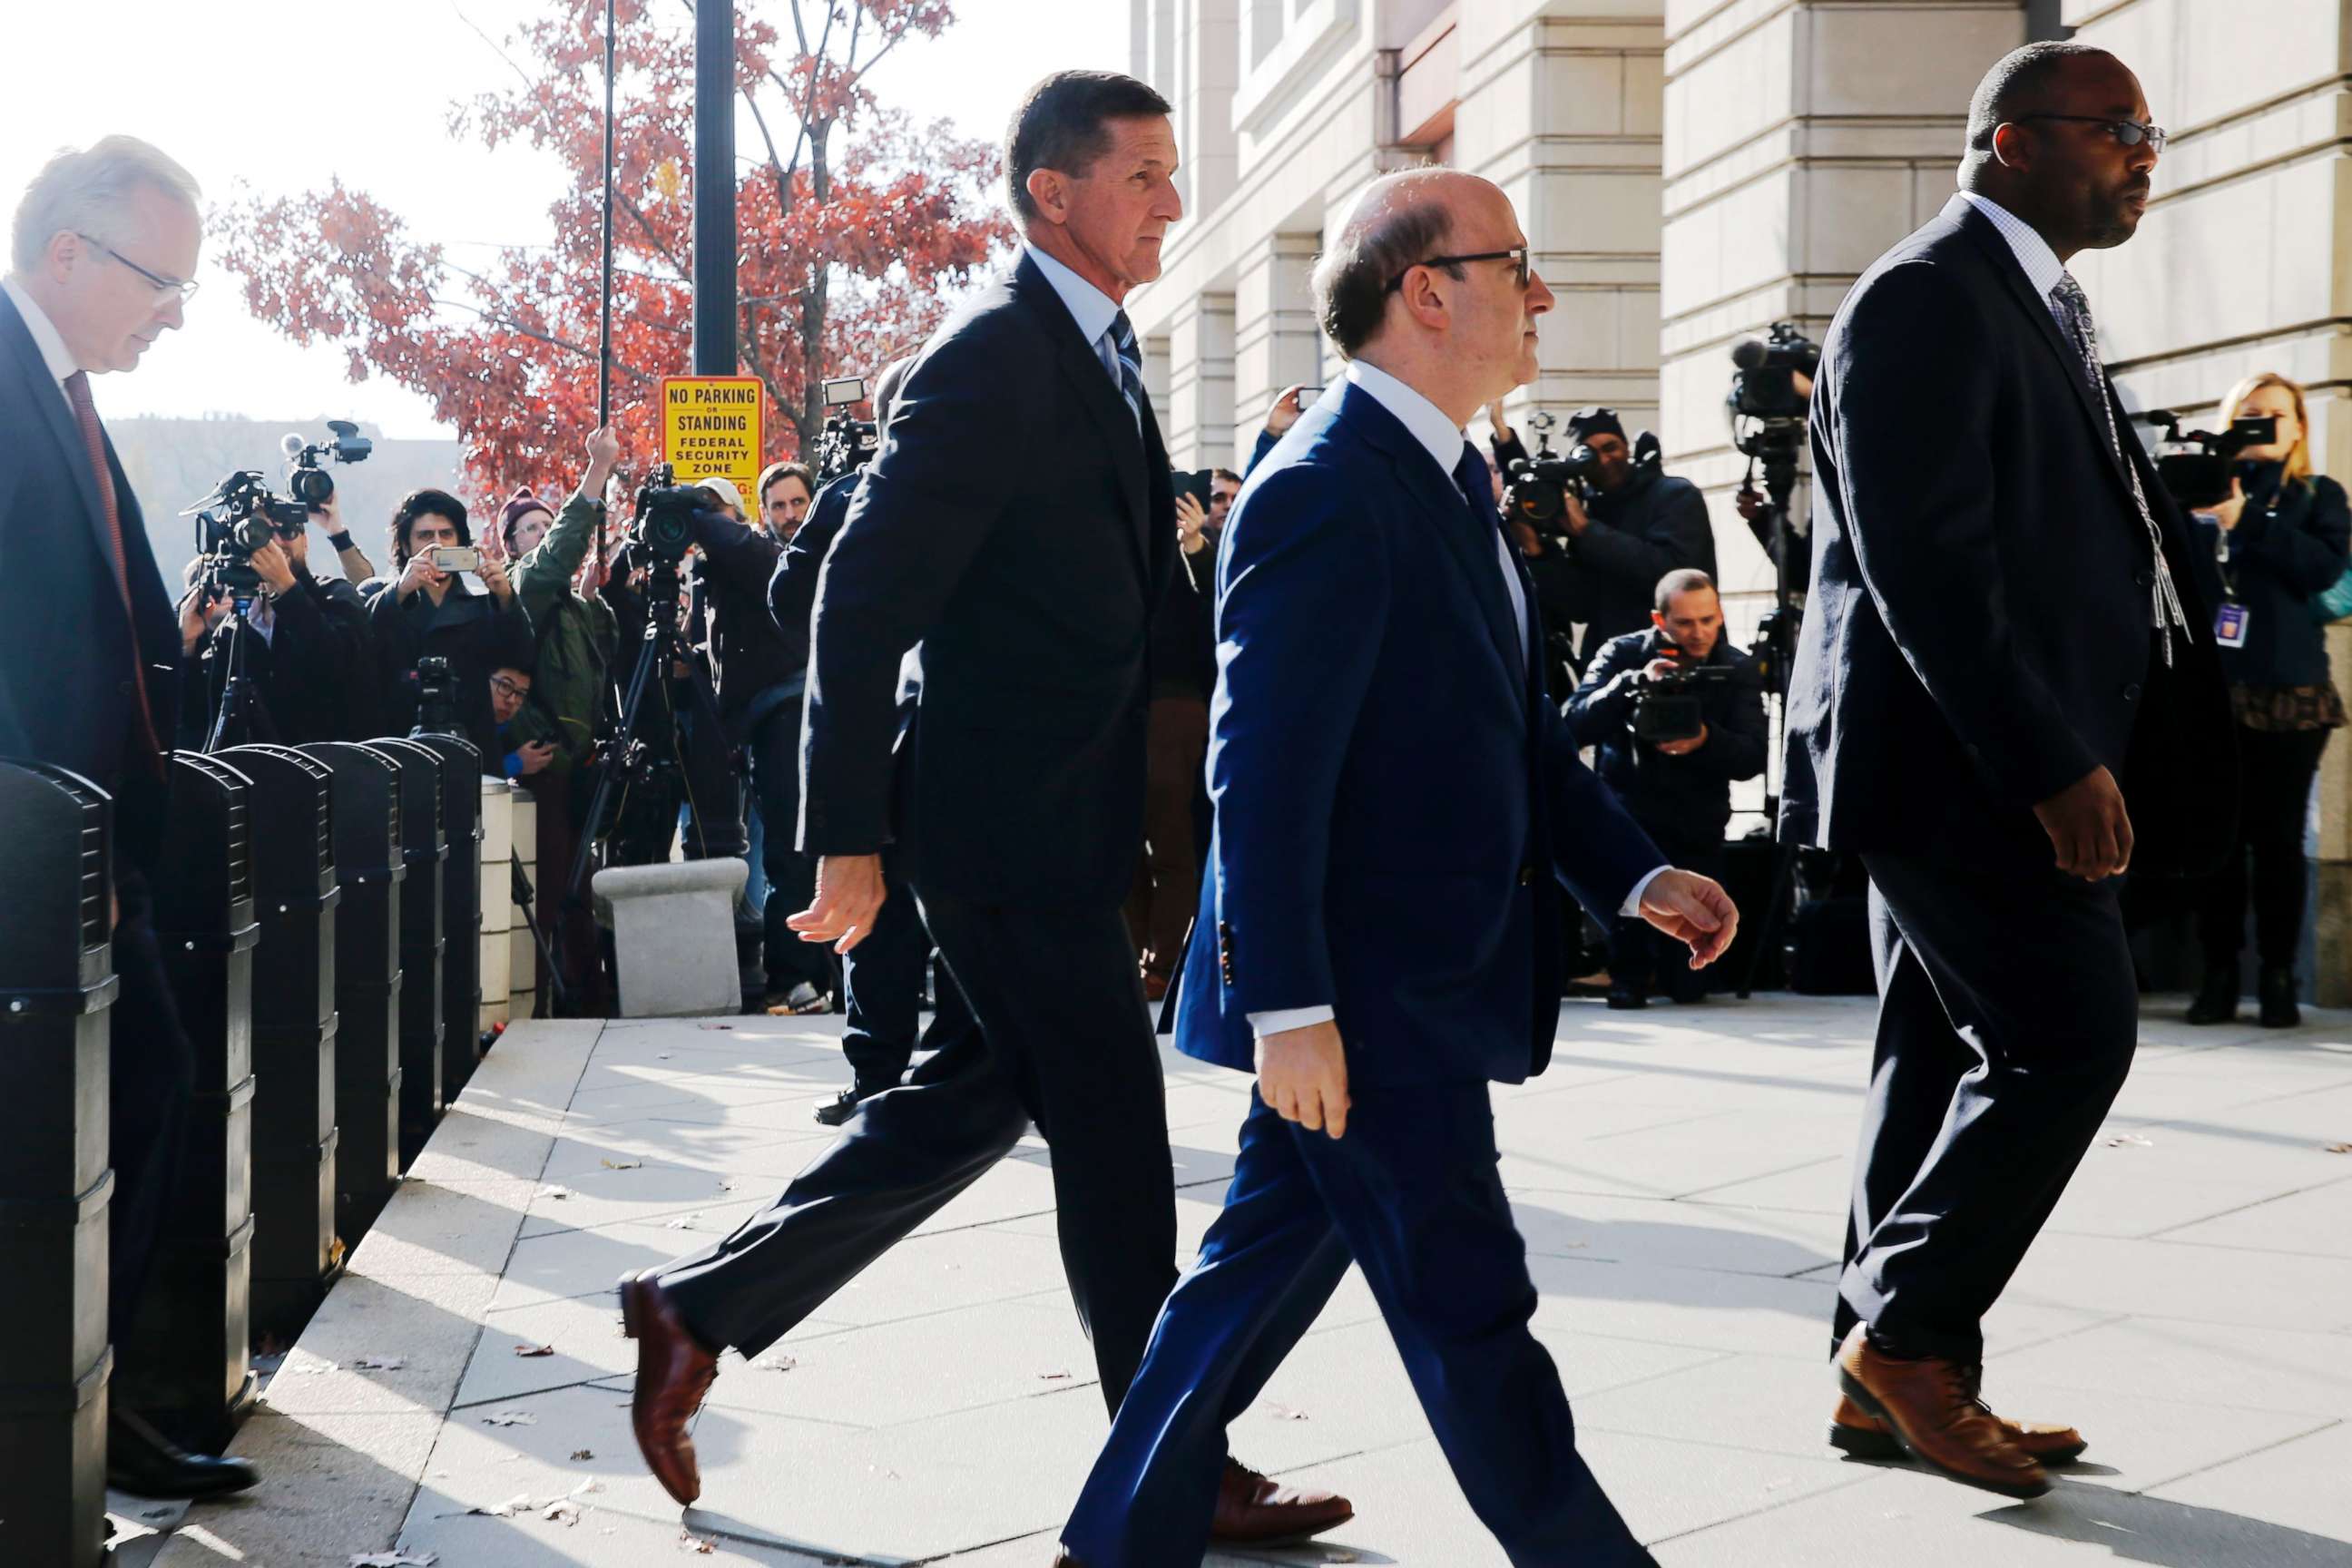 PHOTO:Former U.S. National Security Adviser Michael Flynn, left, with his attorney Robert Kelner, center, as he arrives for a plea hearing at U.S. District Court in Washington,D.C., Dec. 1, 2017.